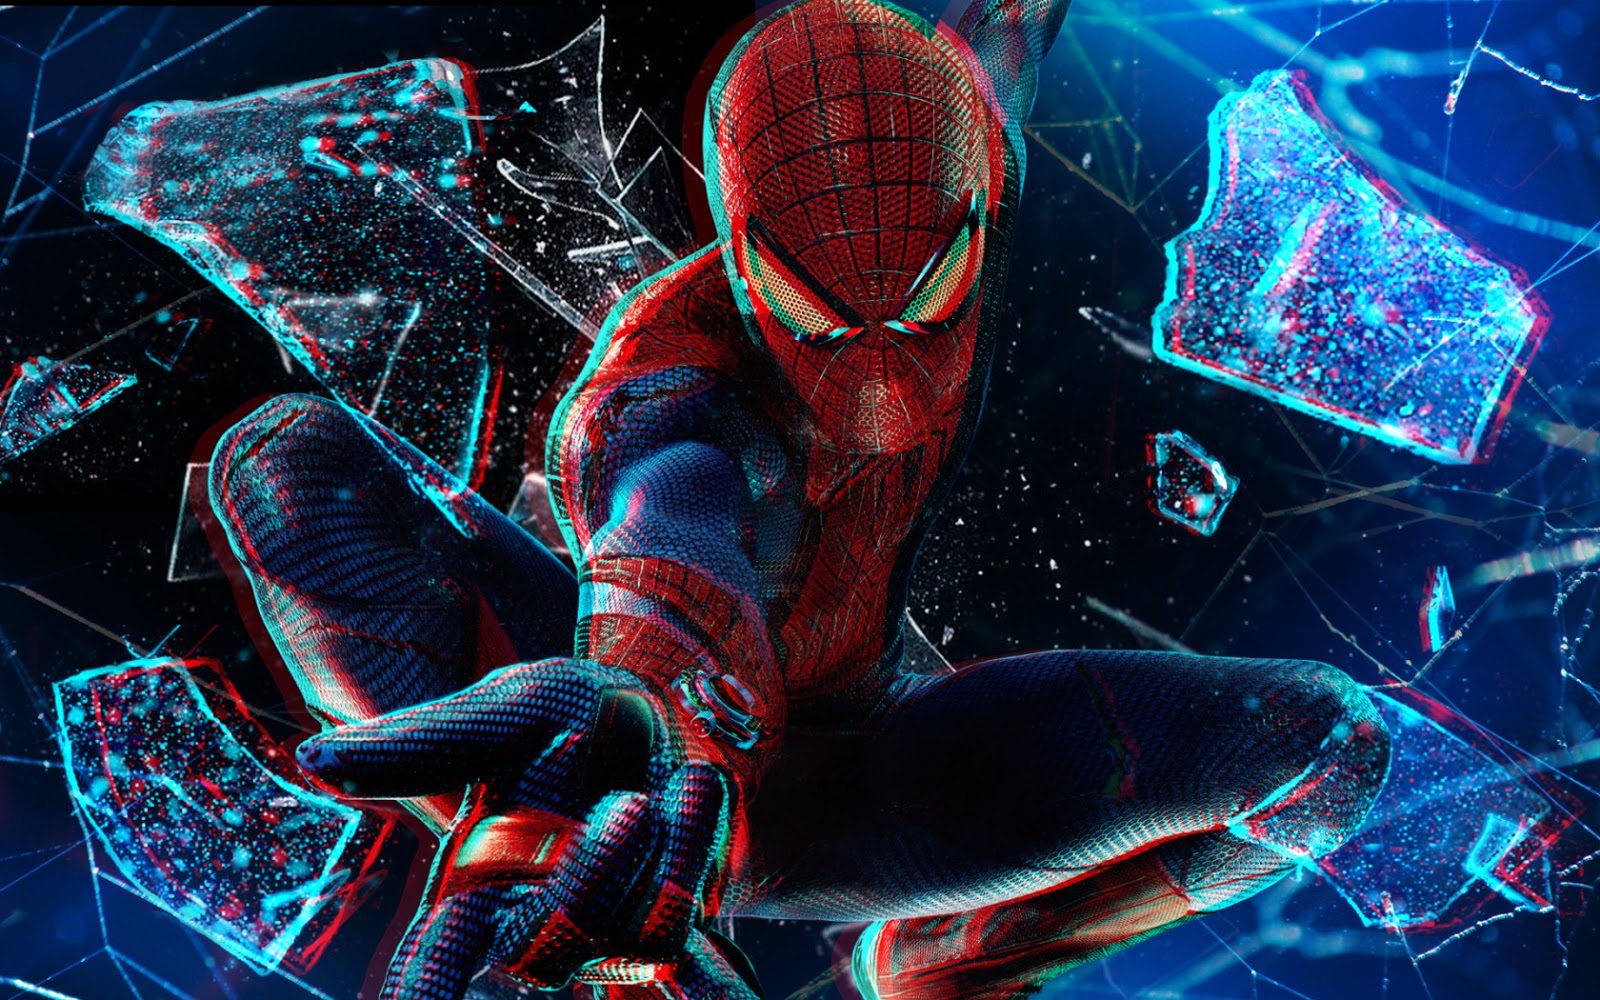 wallpapers hd for mac: The amazing spider man wallpapers hd